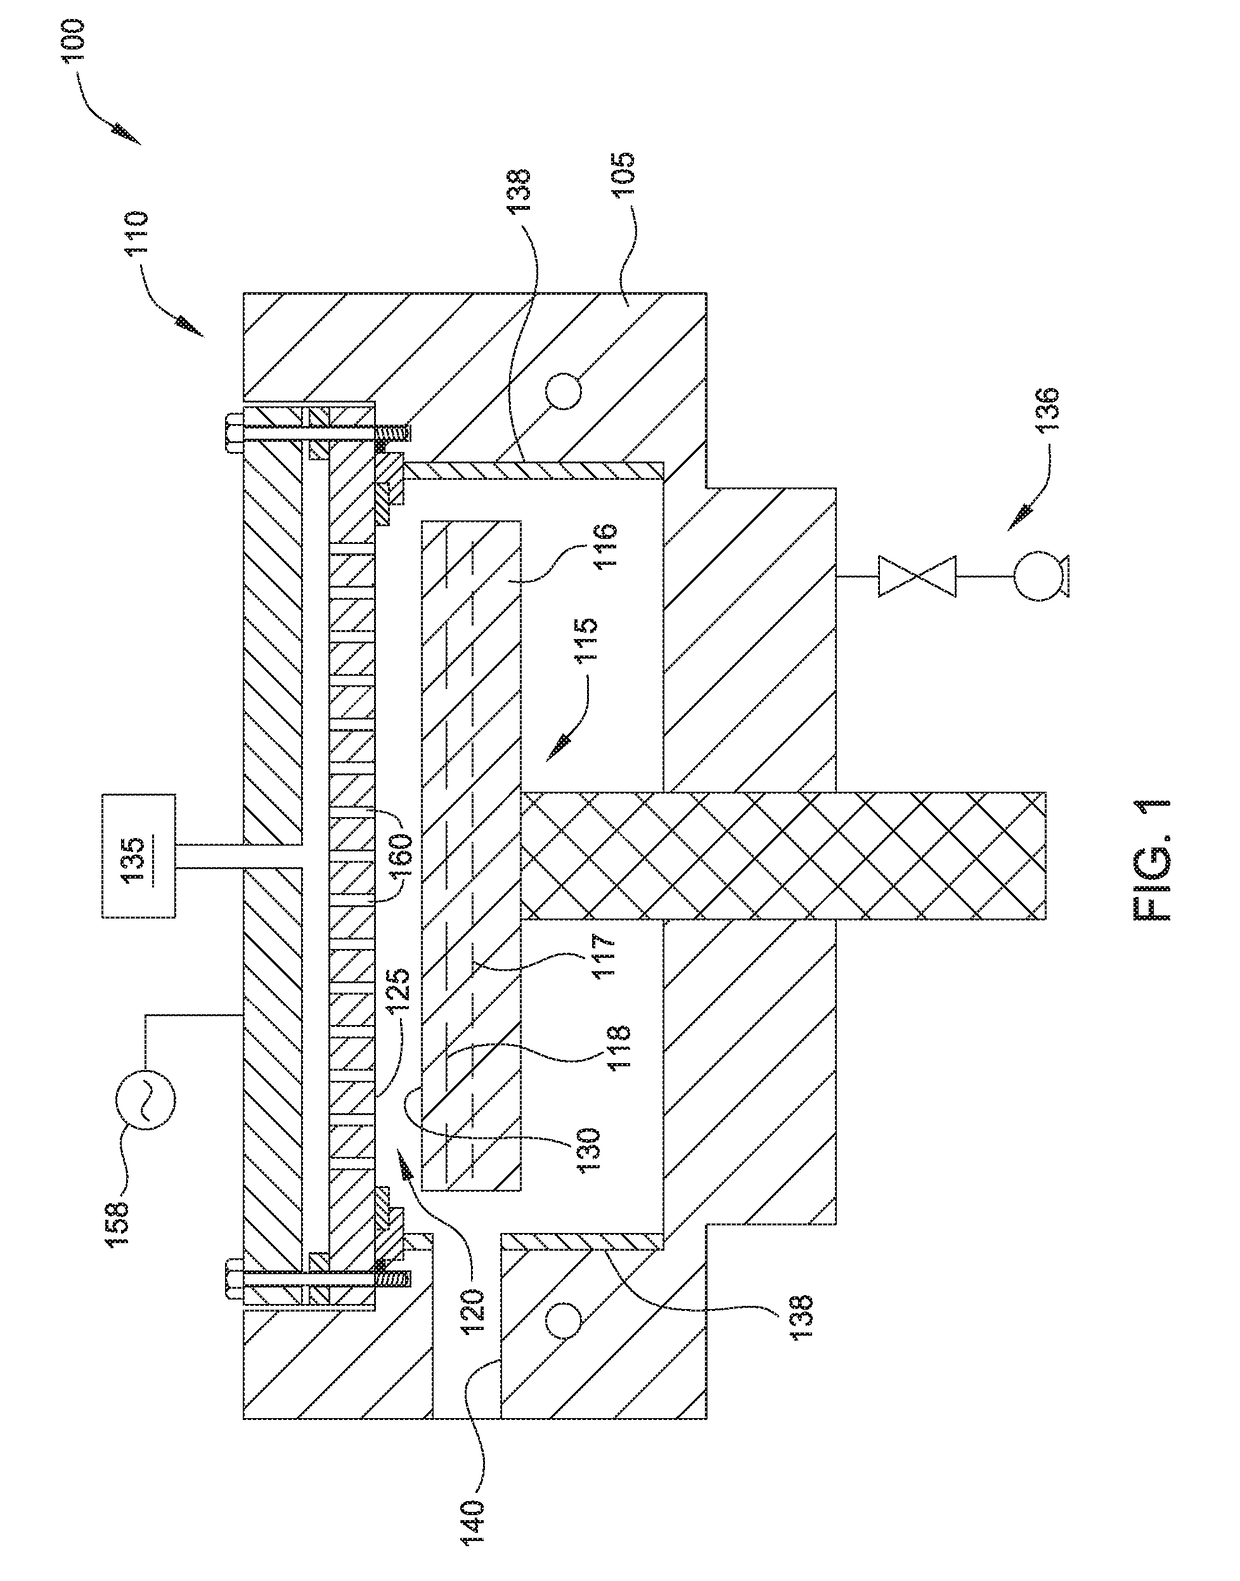 Electrostatic chuck having properties for optimal thin film deposition or etch processes